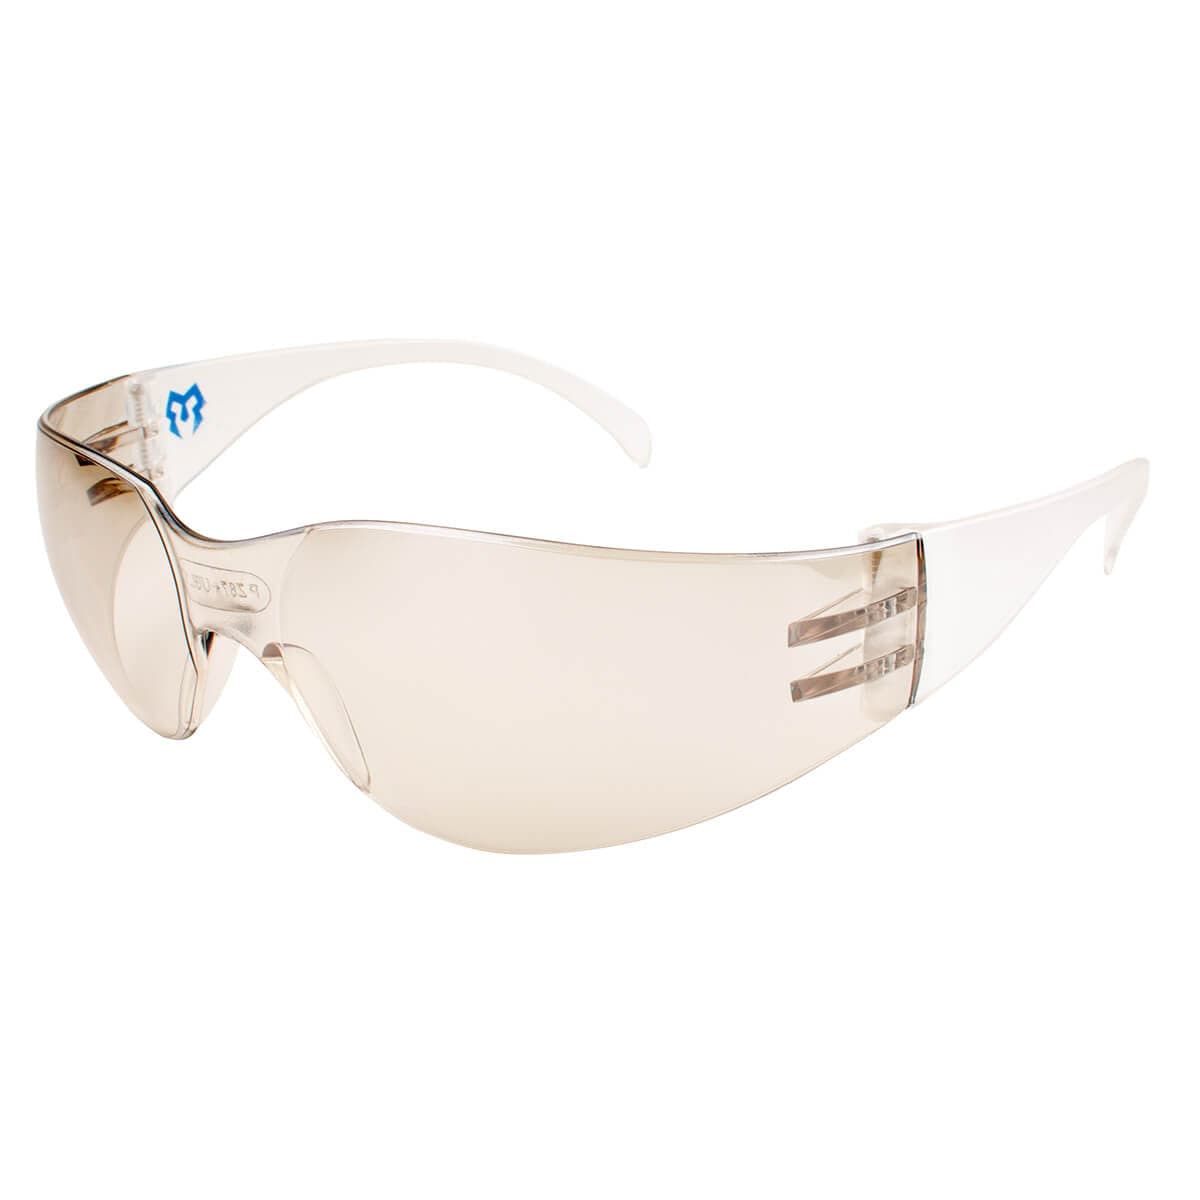 METEL M10 Safety Glasses with Indoor/Outdoor Mirror Lenses